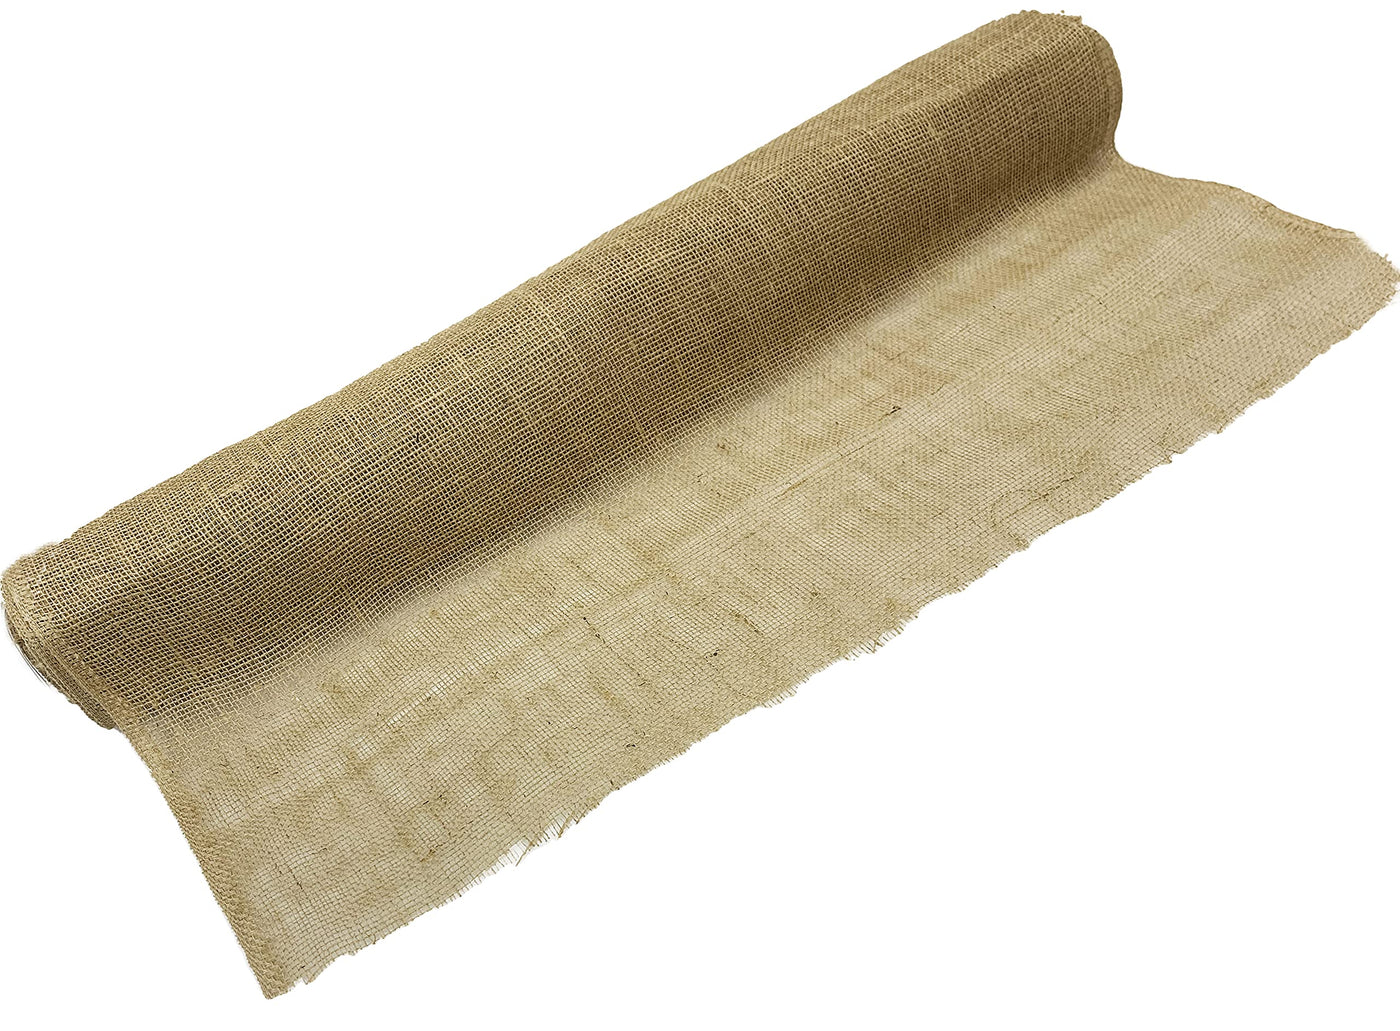 AAYU Natural Burlap Fabric Roll 36 Inch x 16 Yards Disposable Jute Burlap Planter Liner Weed Barrier Biodegradable Garden Fabric Heavy 7oz